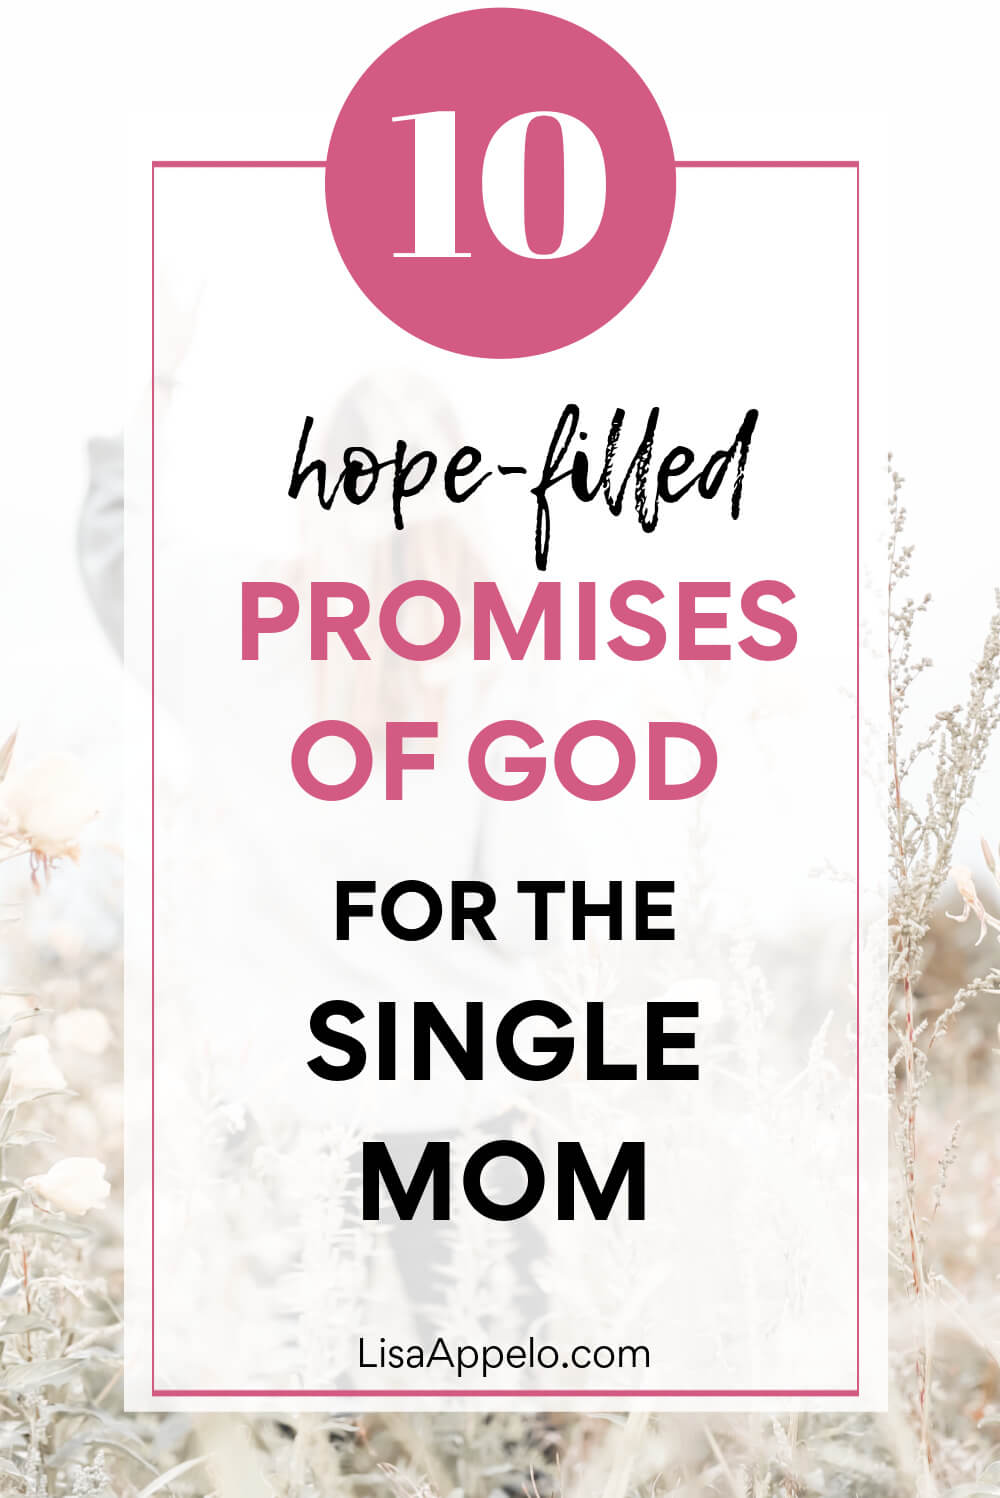 10 Promises of God for the Single Mom